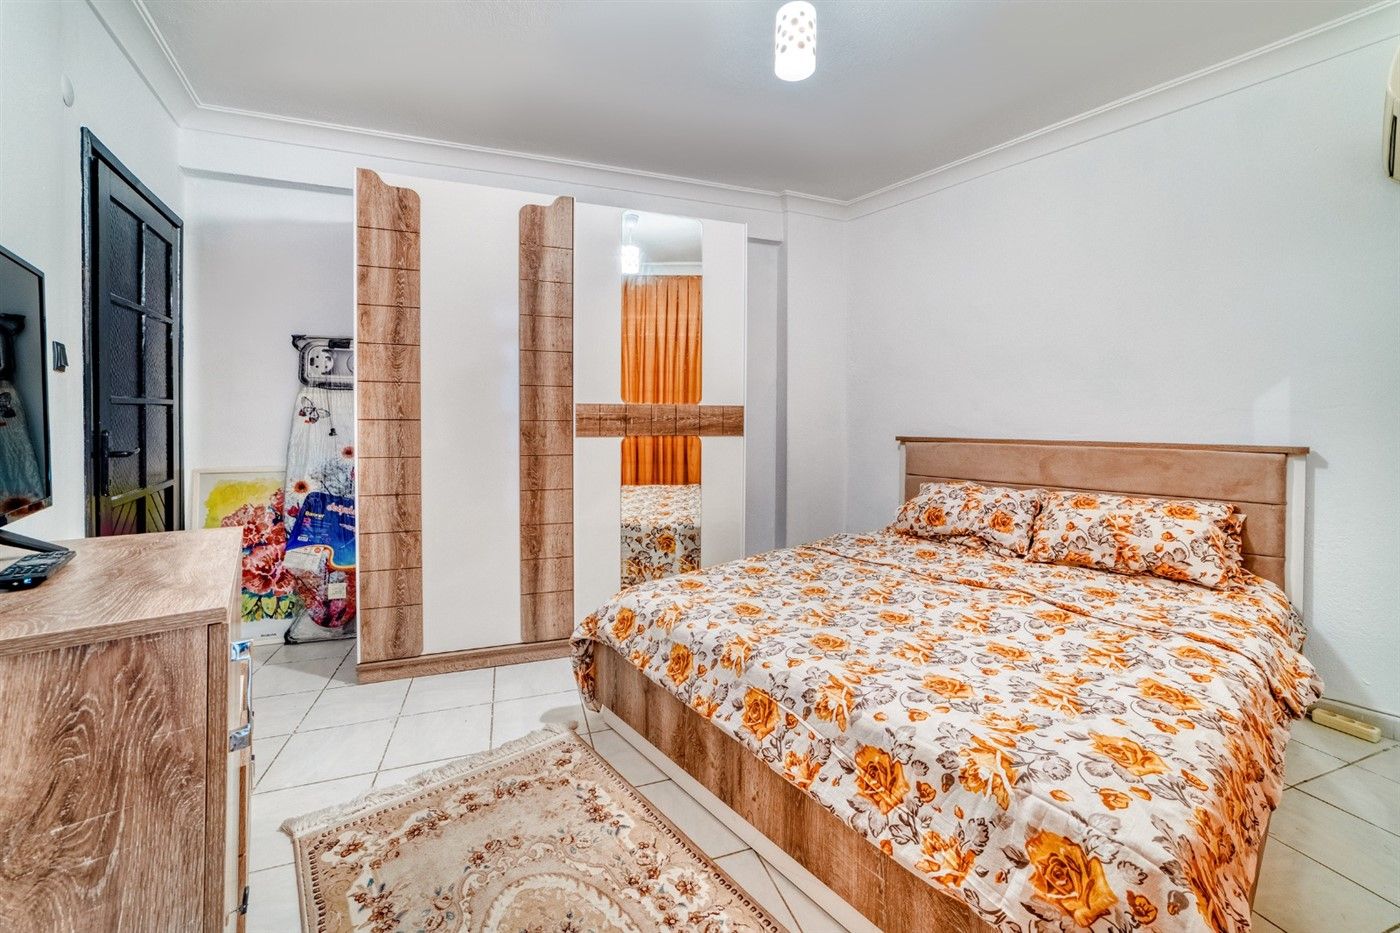 1-bedroom apartment in the center of Alanya